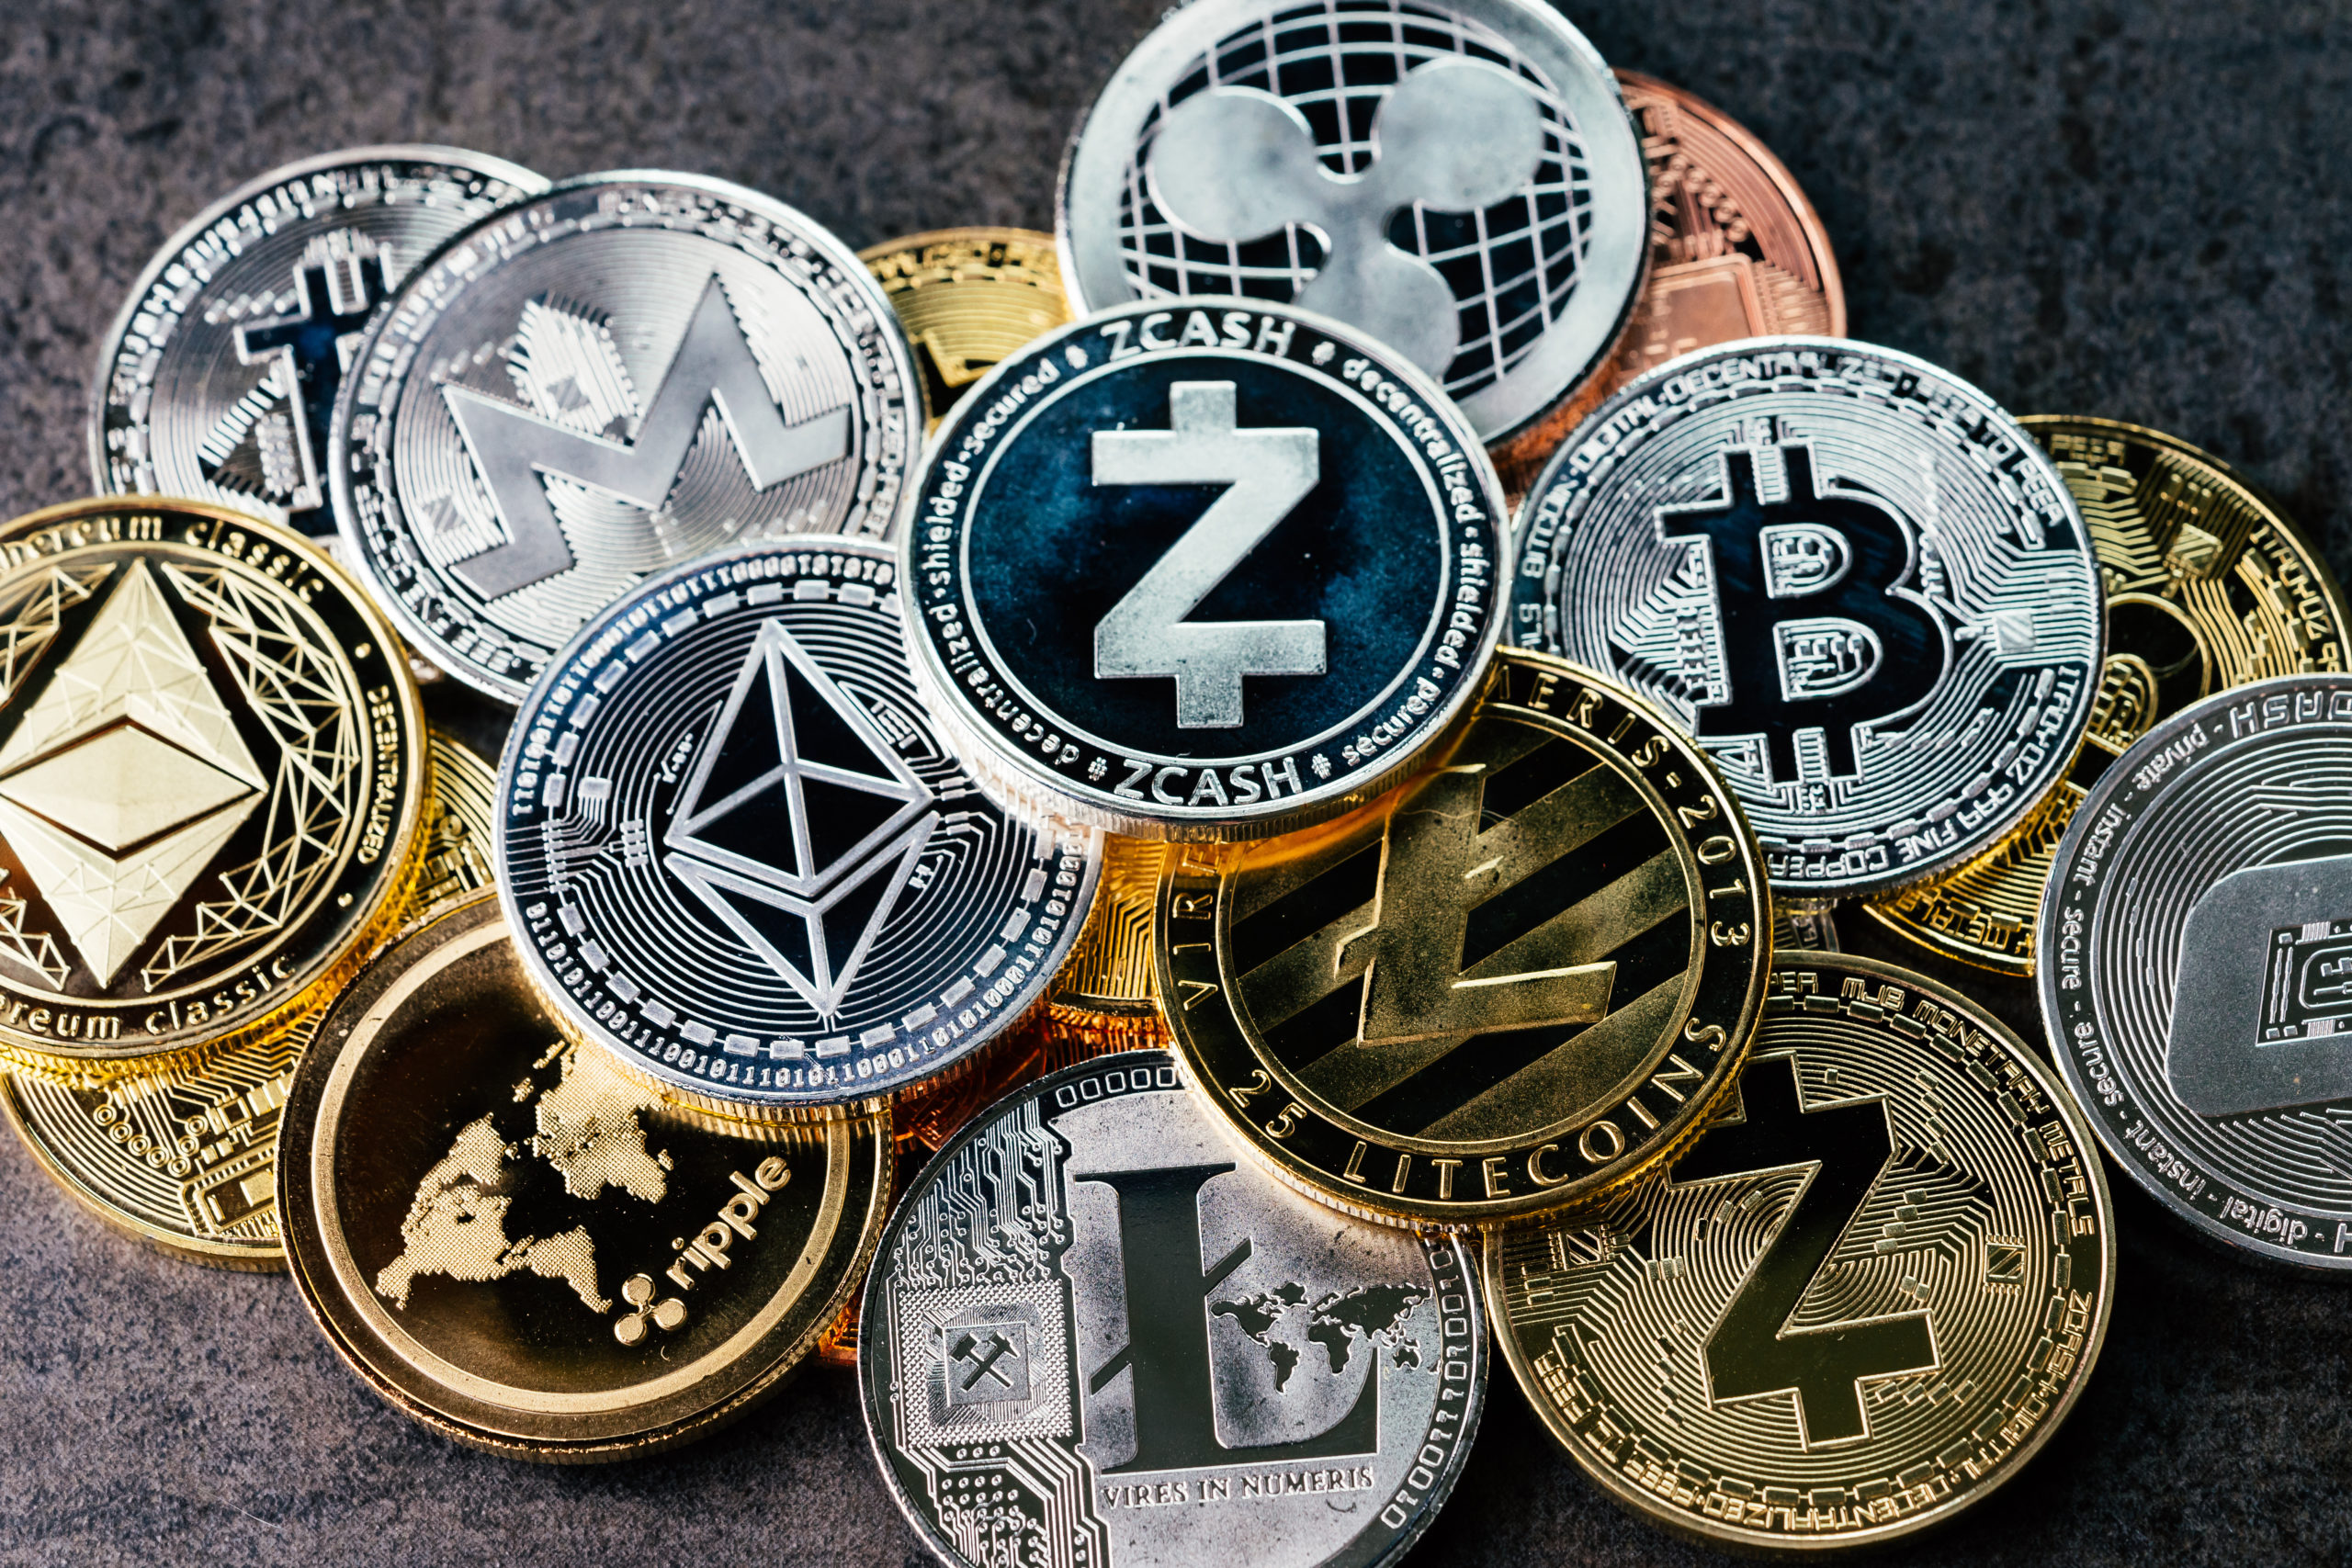 crypto-currency-background-with-various-of-shiny-silver-and-golden-physical-cryptocurrencies-symbol-coins-bitcoin-ethereum-litecoin-zcash-ripple-stockpack-adobe-stock-scaled.jpg